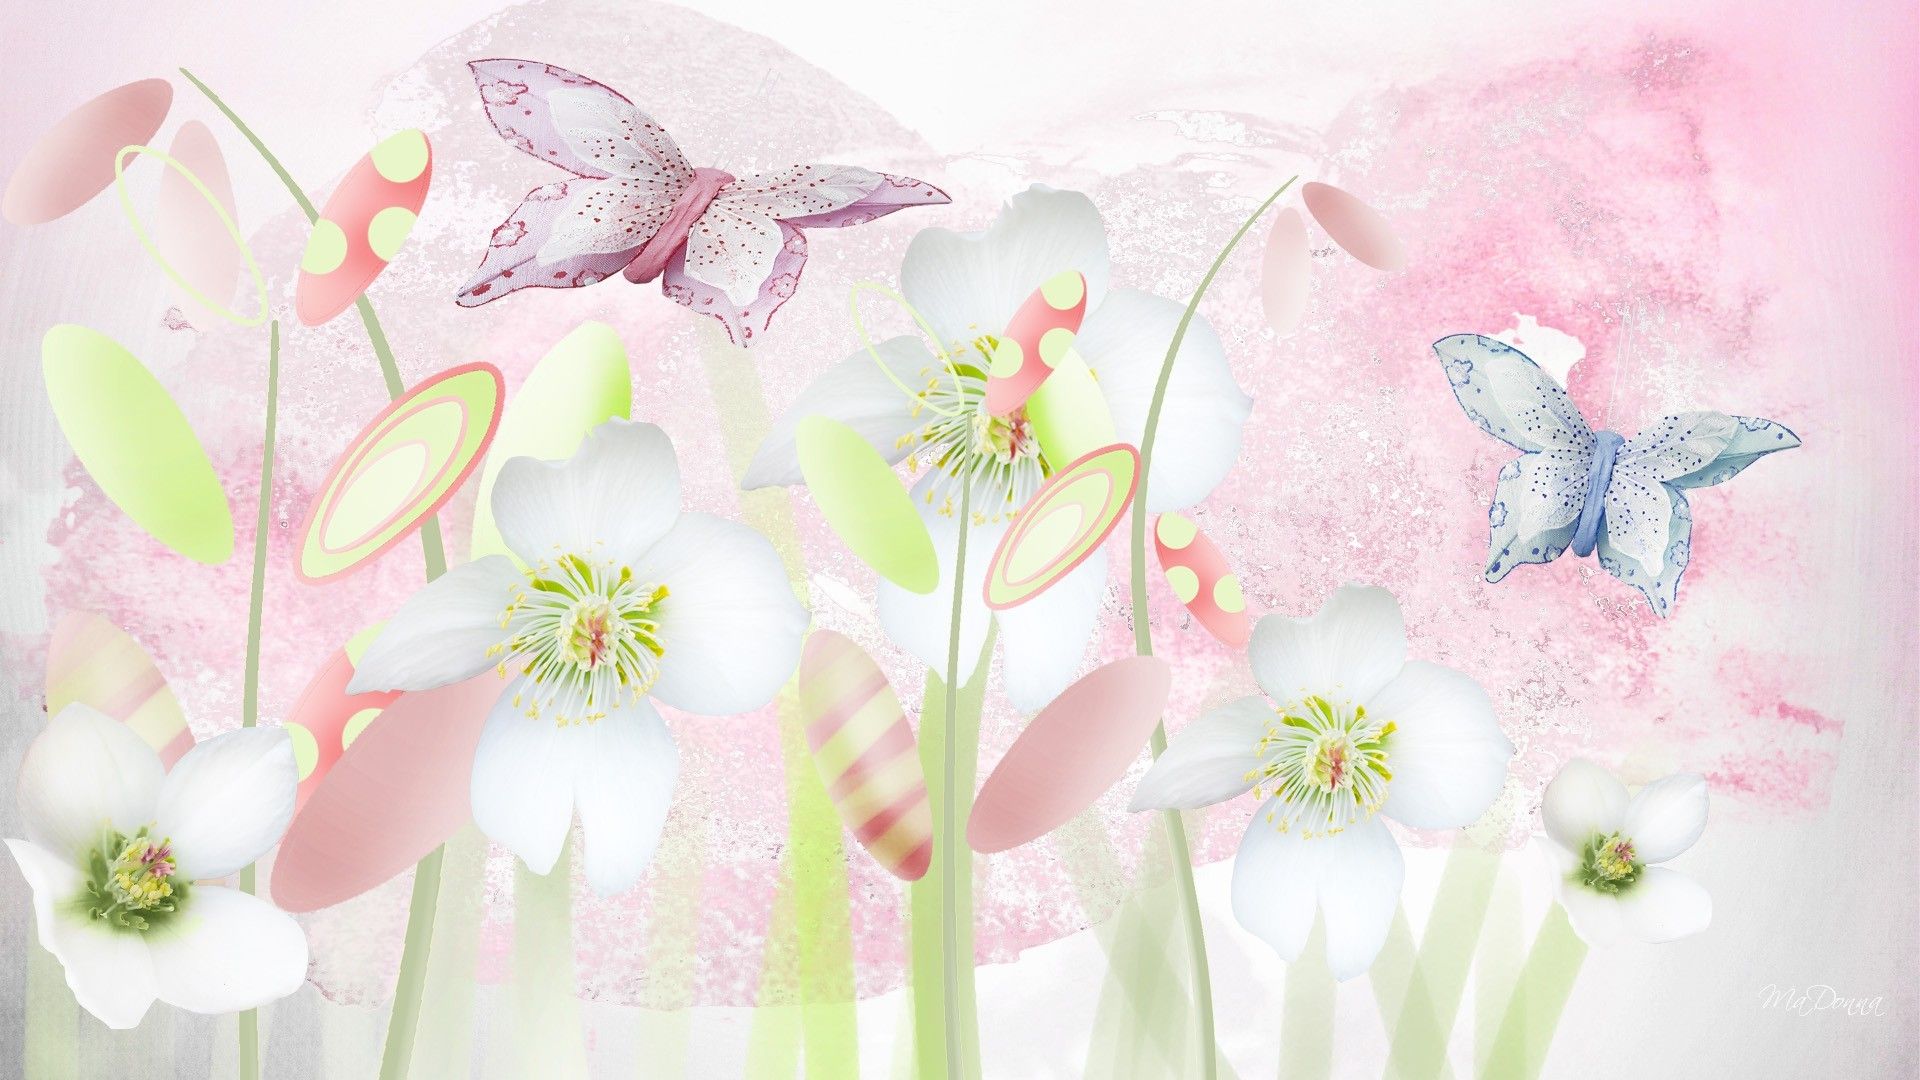 Pastel Butterfly Wallpapers